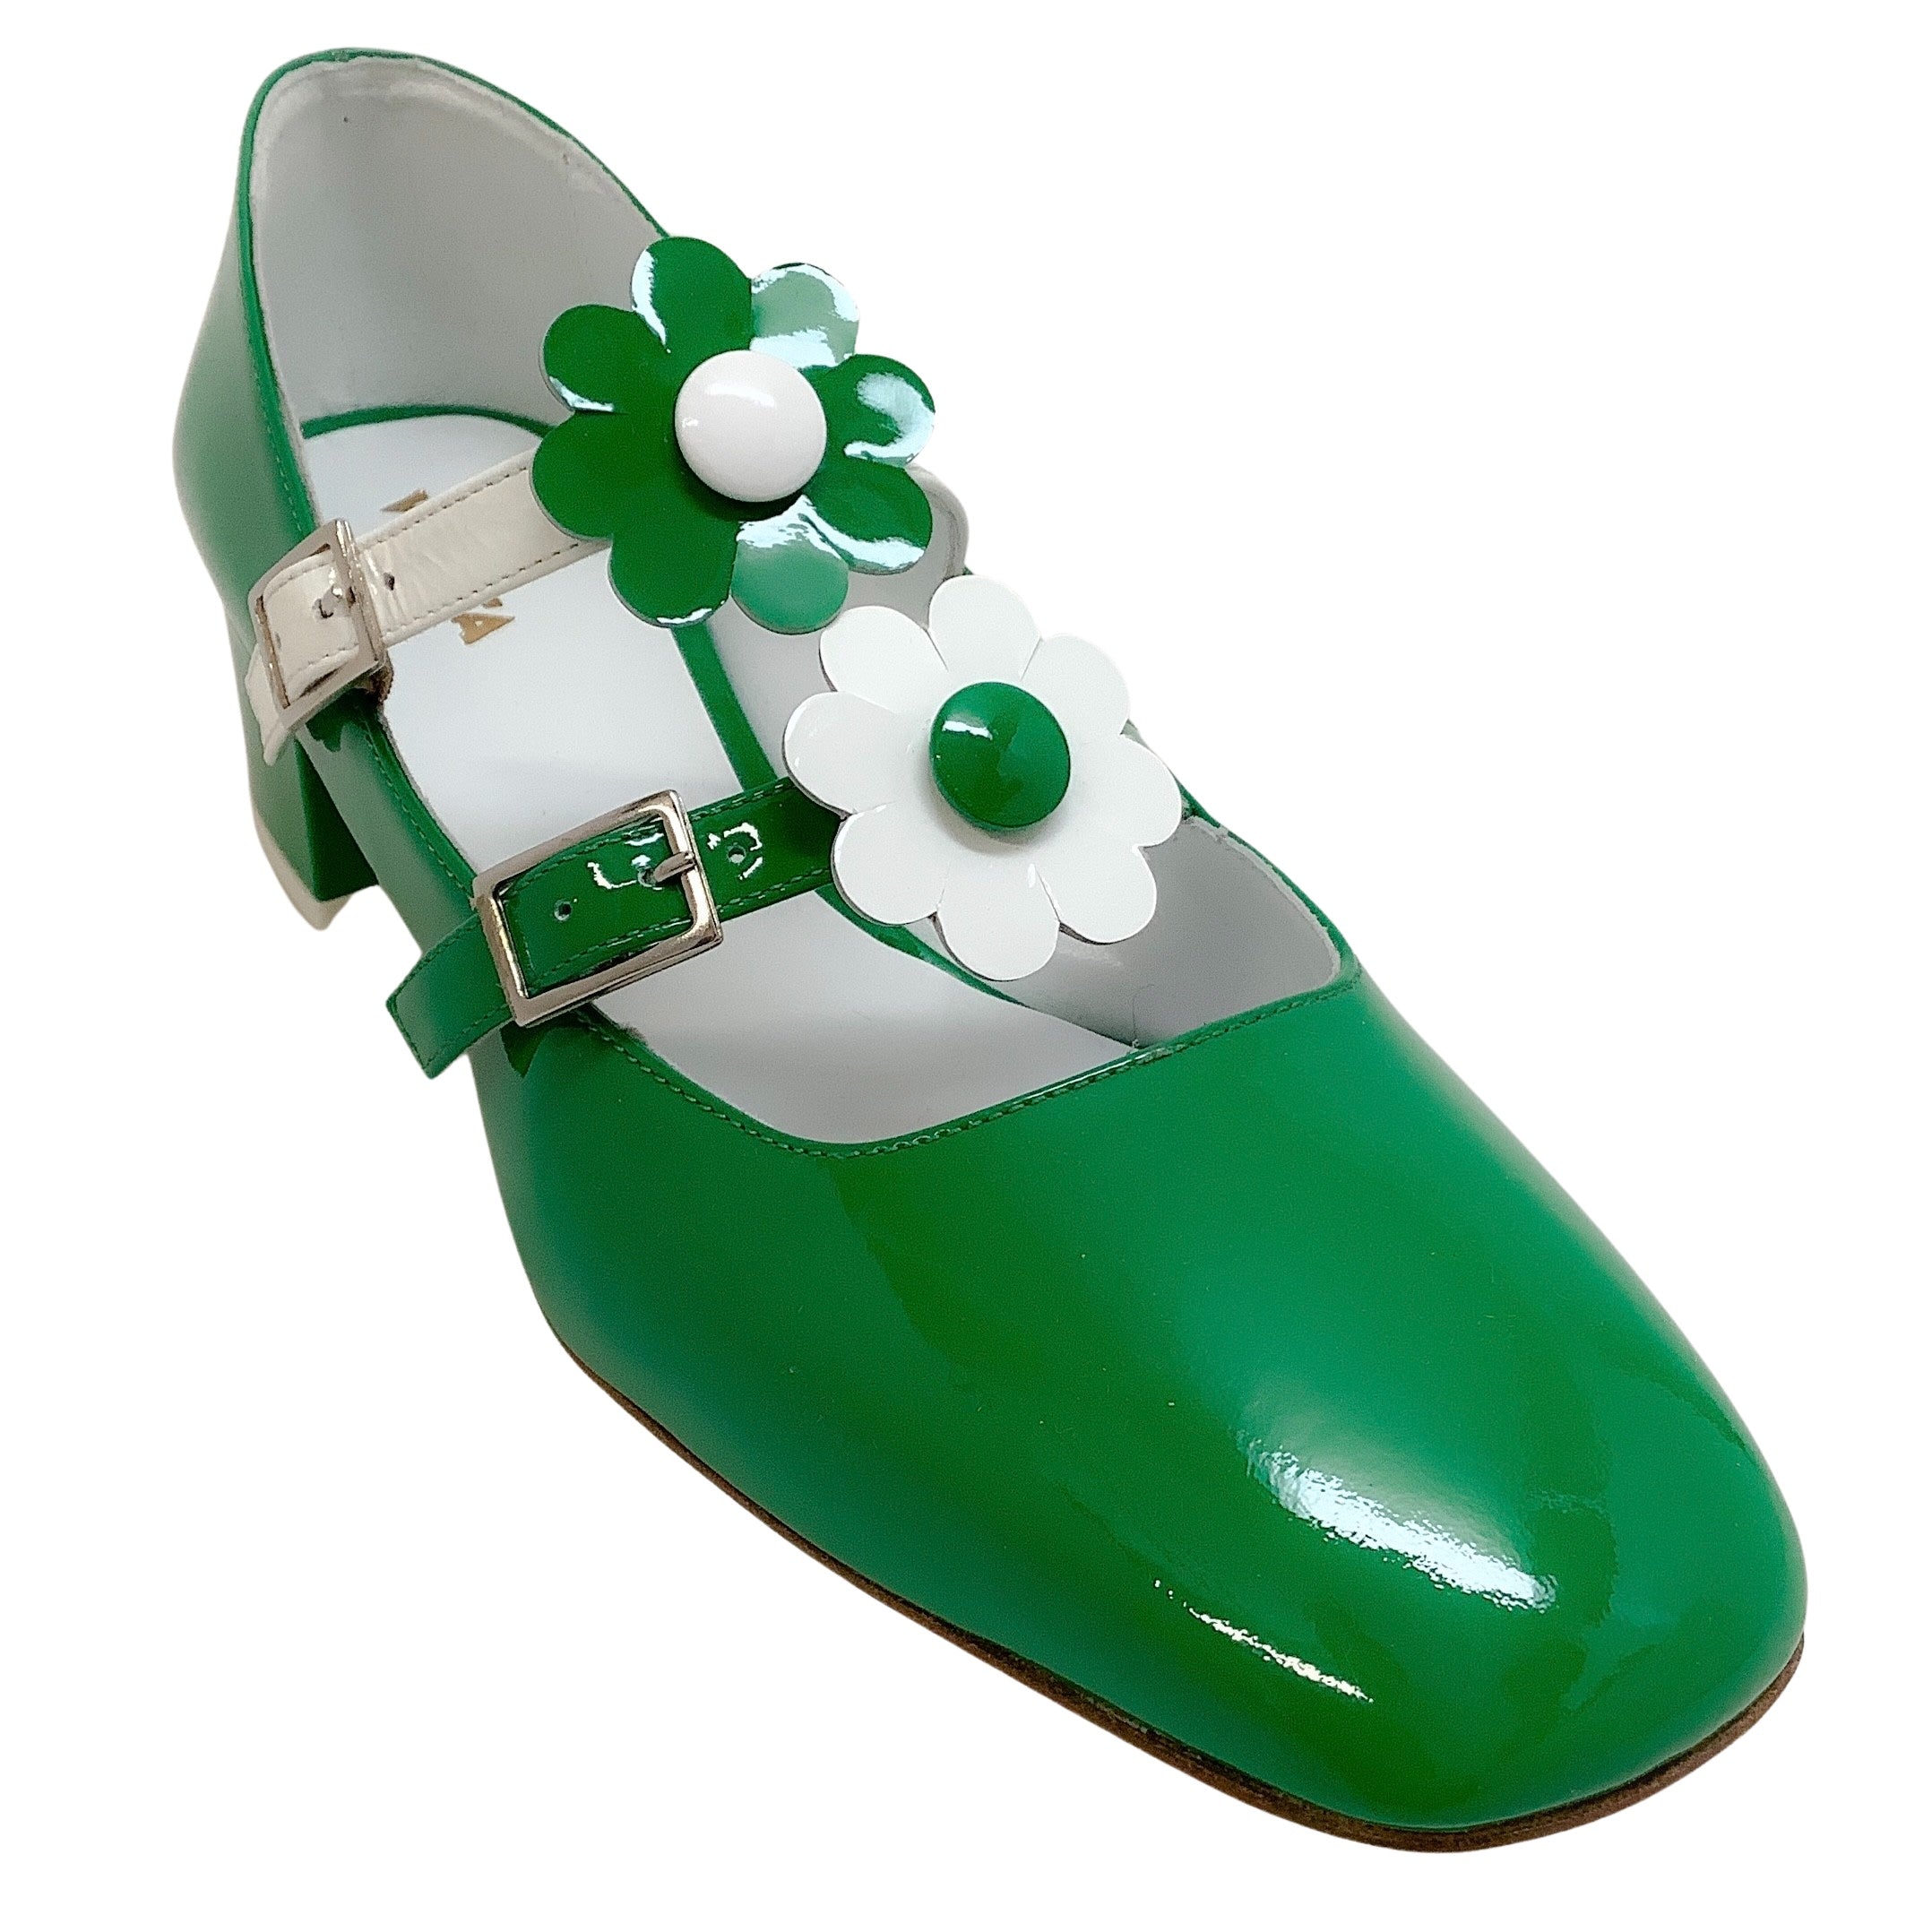 Vivetta Green / White Patent Leather Mary Jane Pumps with Flower Embellishments